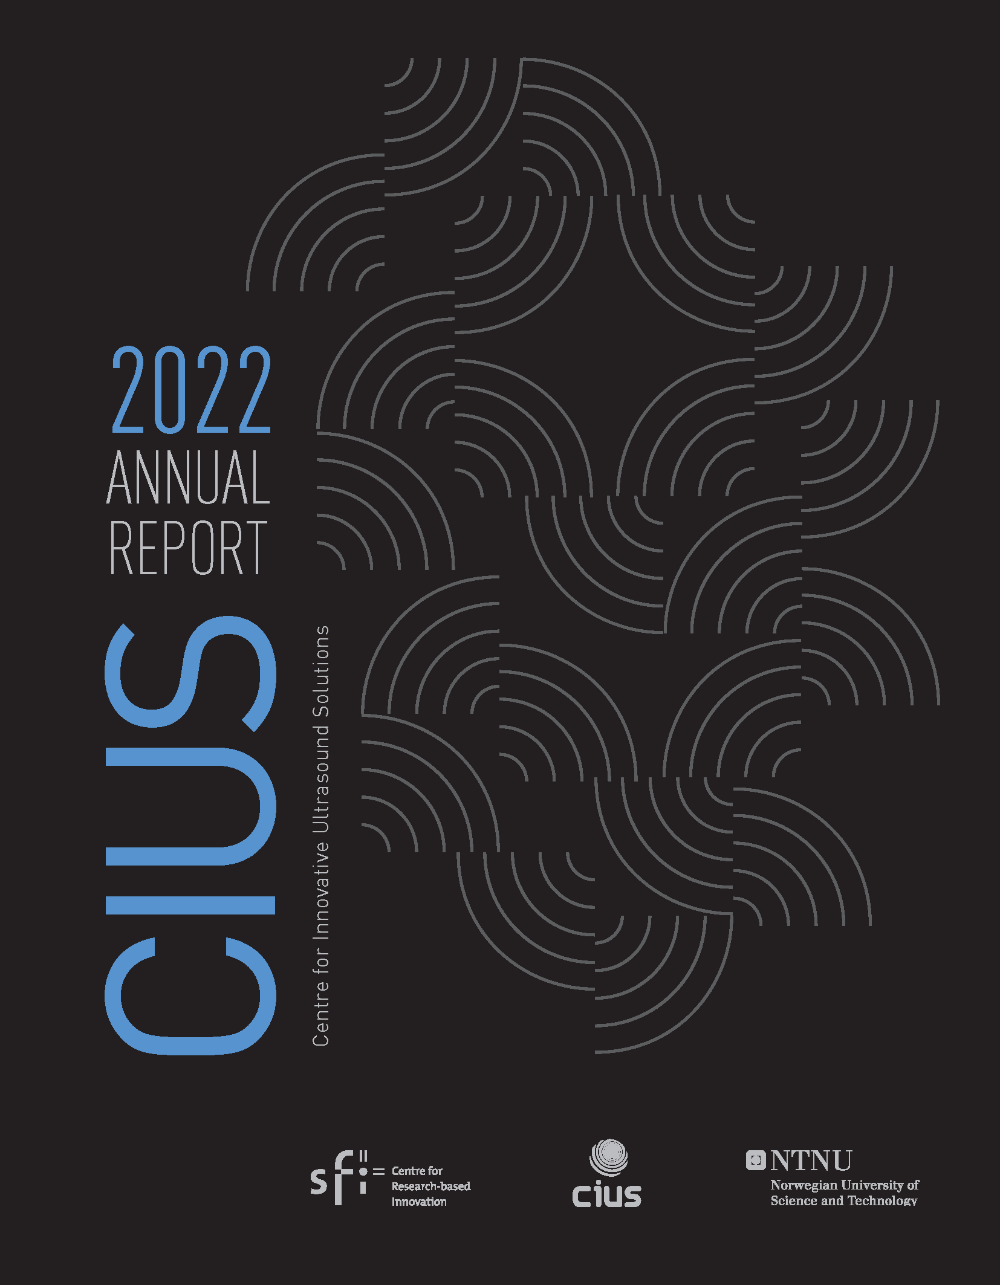 Link to pdf of CIUS annual Report 2022